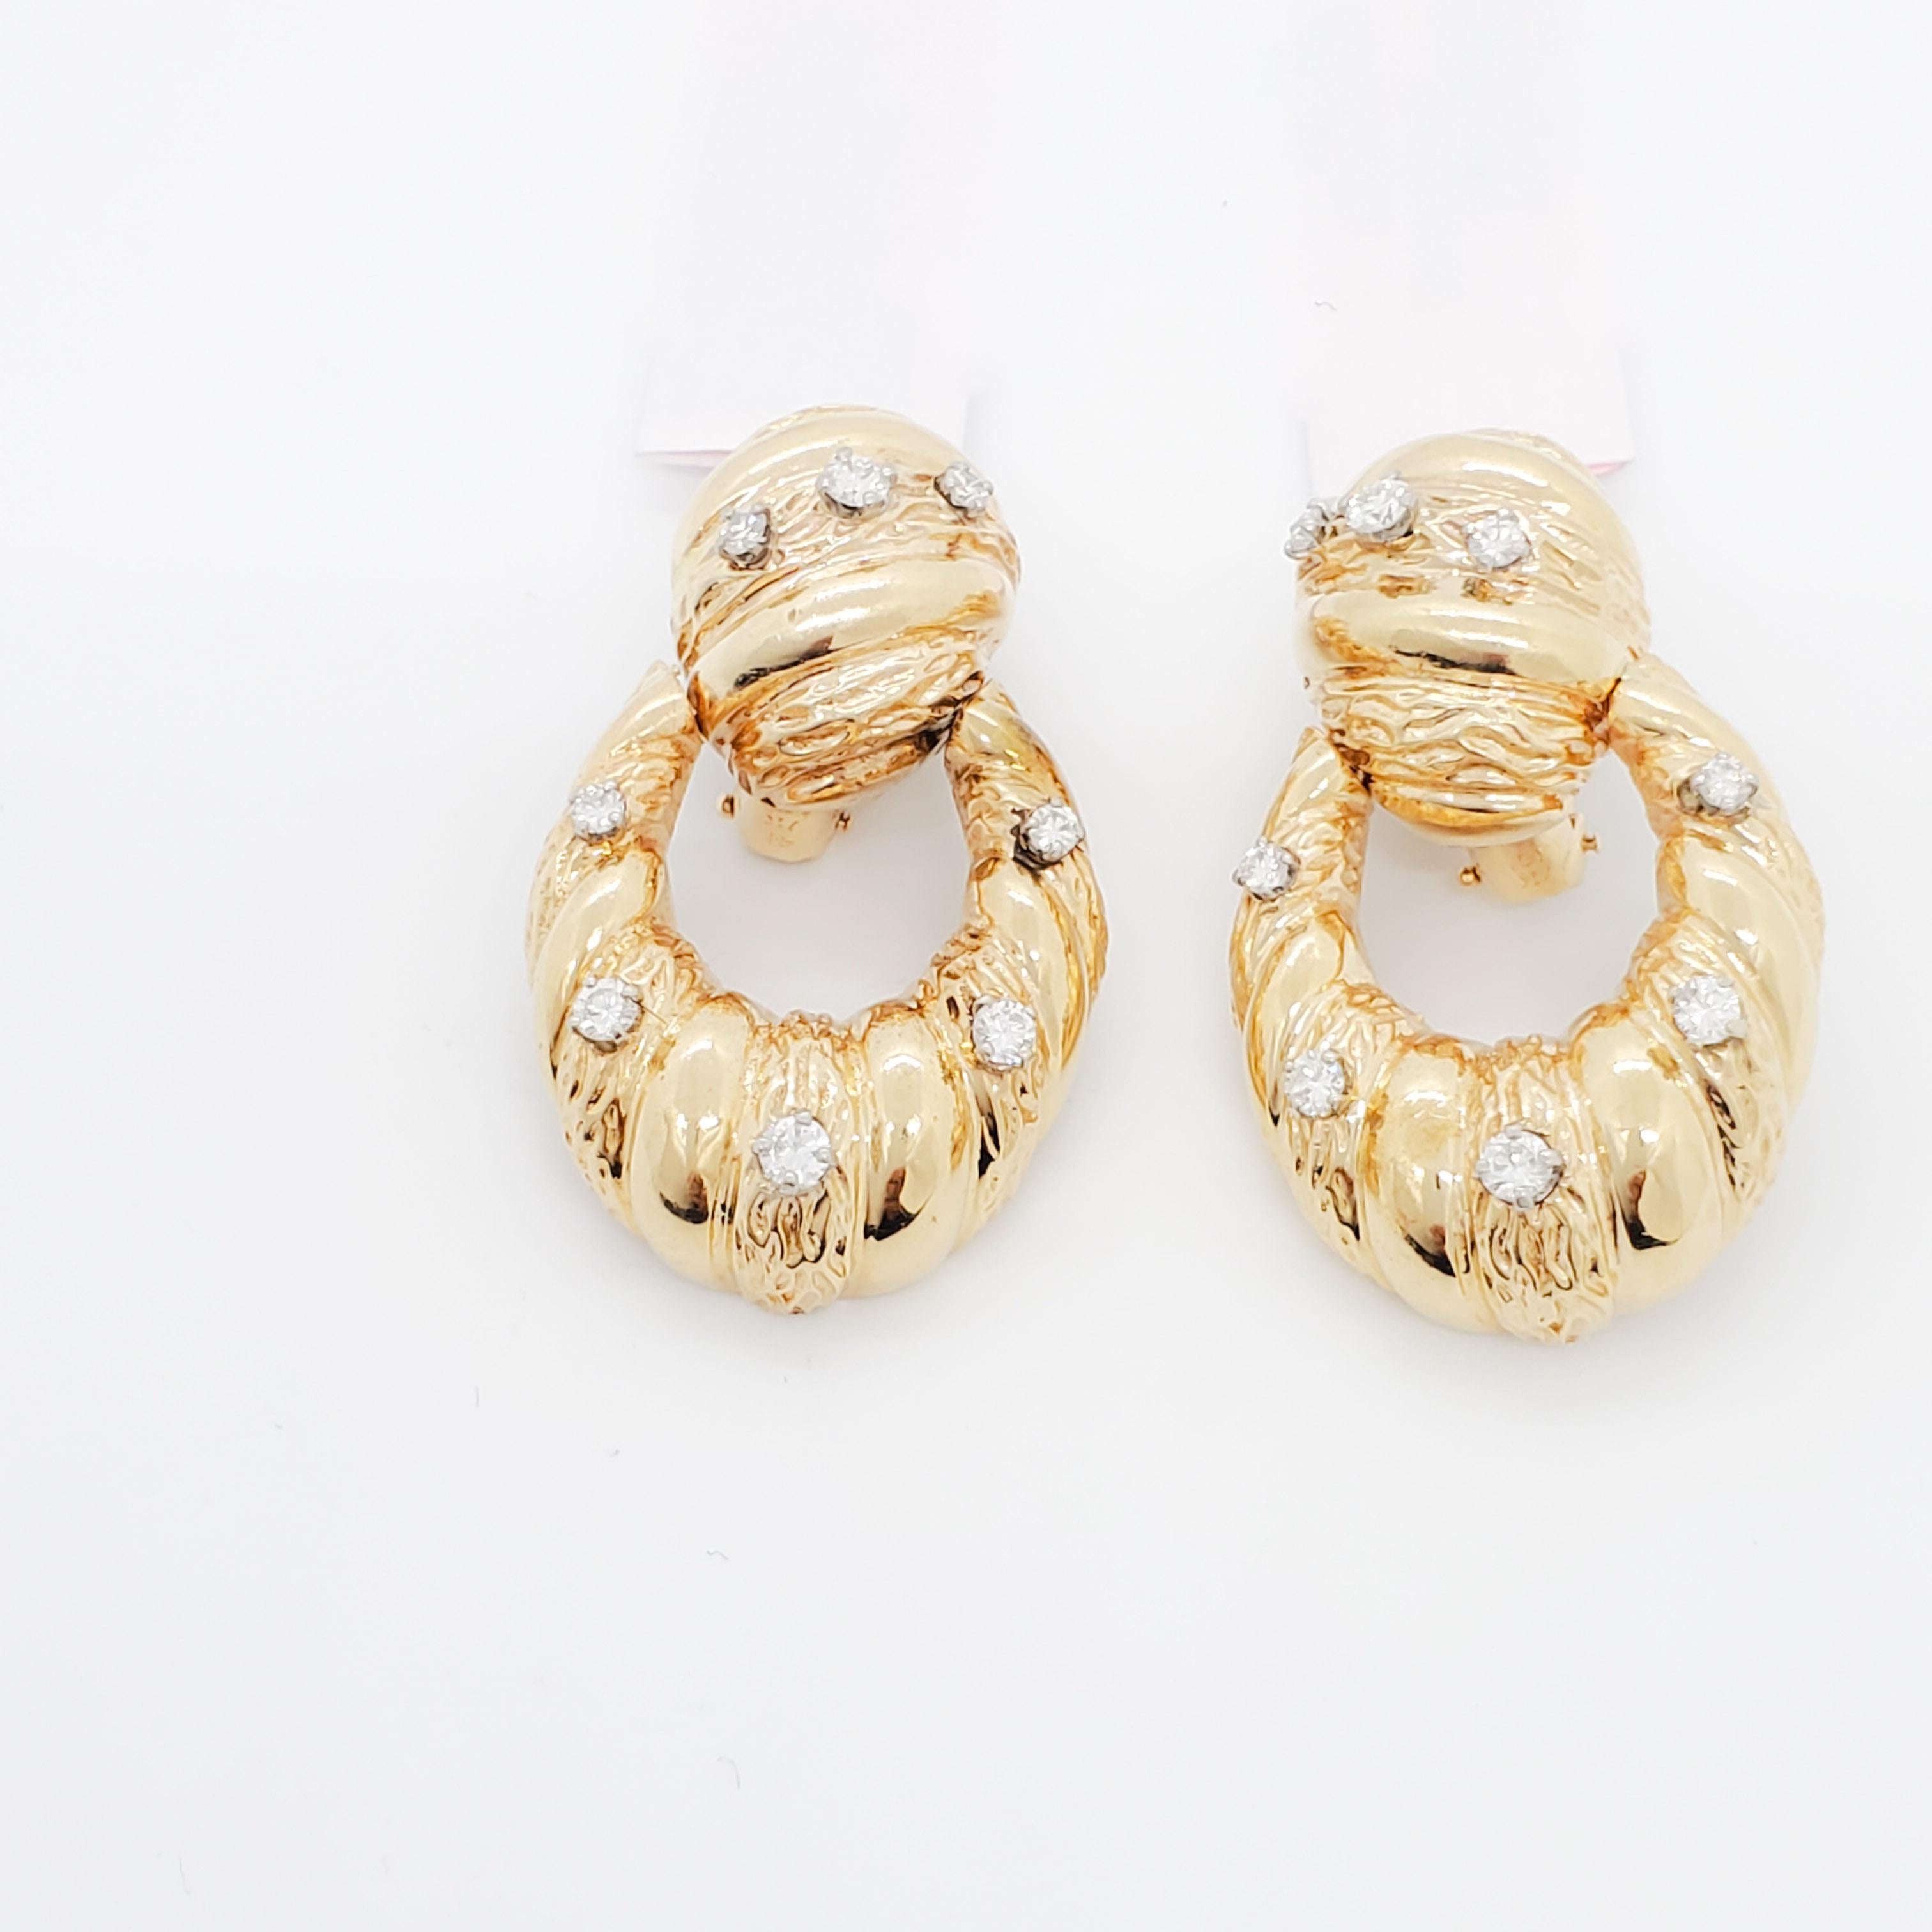 White Diamond and Yellow Gold Earring Clips Door Knocker Design In New Condition For Sale In Los Angeles, CA